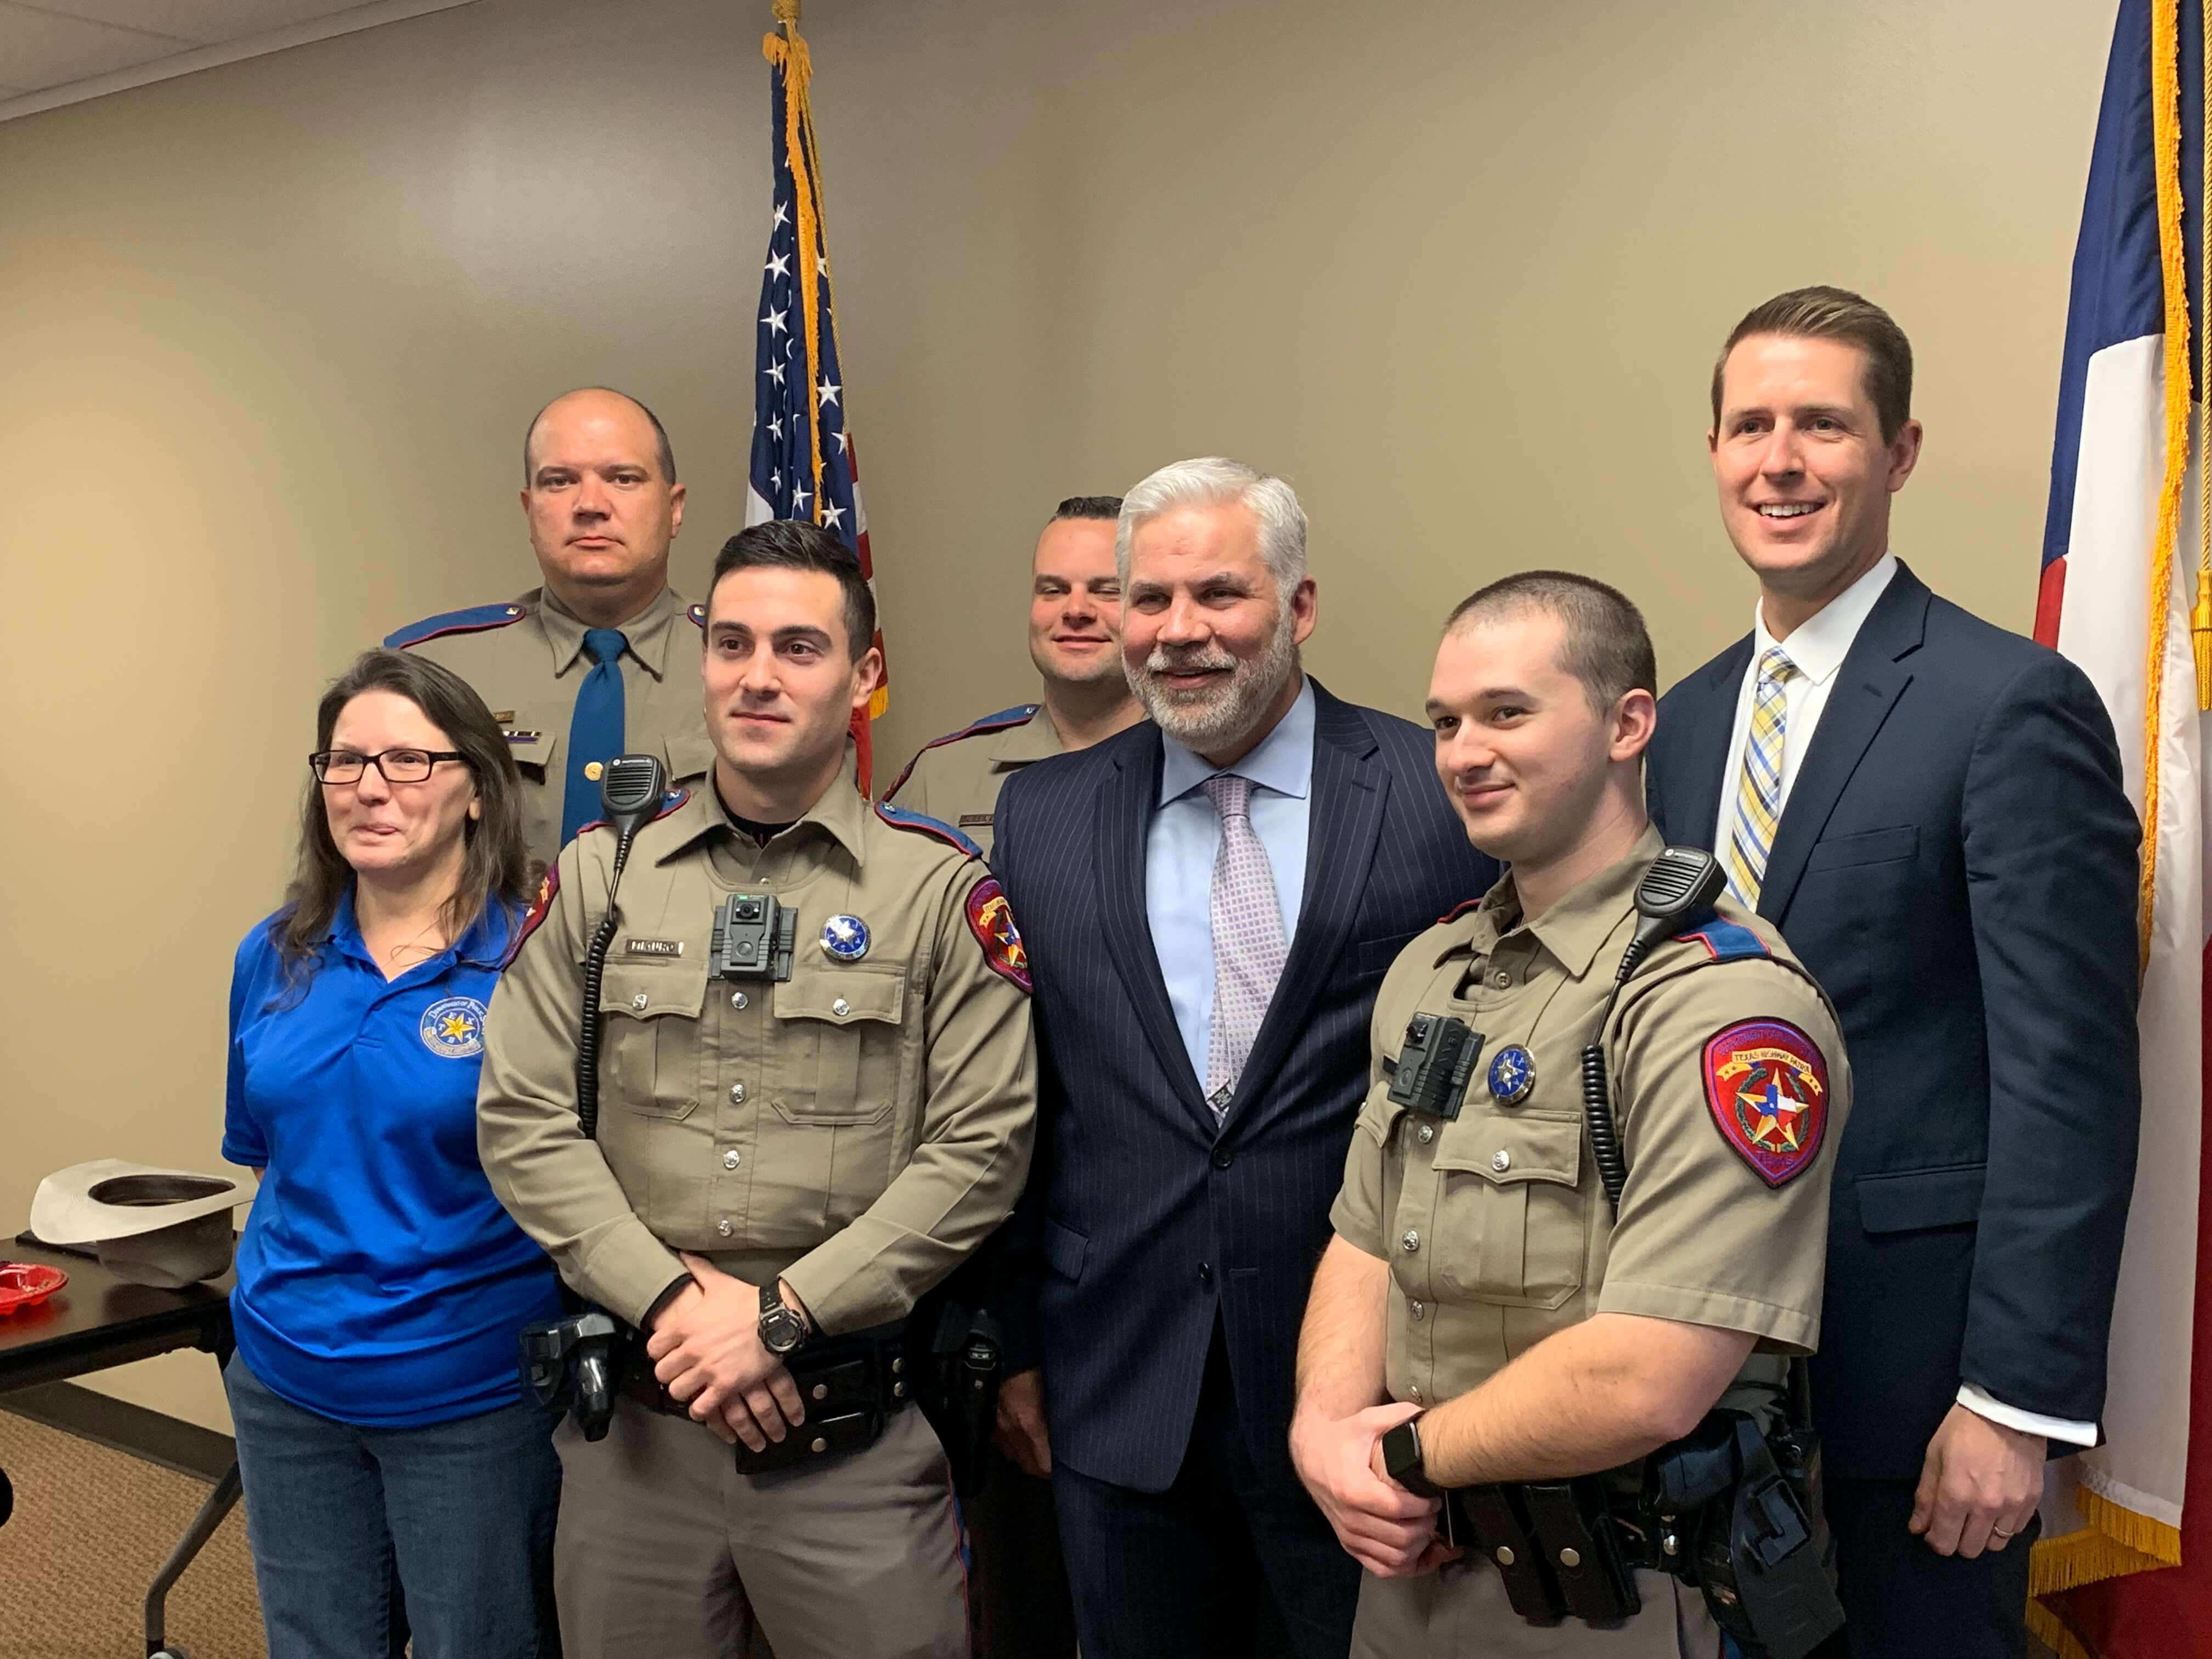 MONTGOMERY COUNTY DISTRICT ATTORNEYS OFFICE 2019 DWI AWARDS